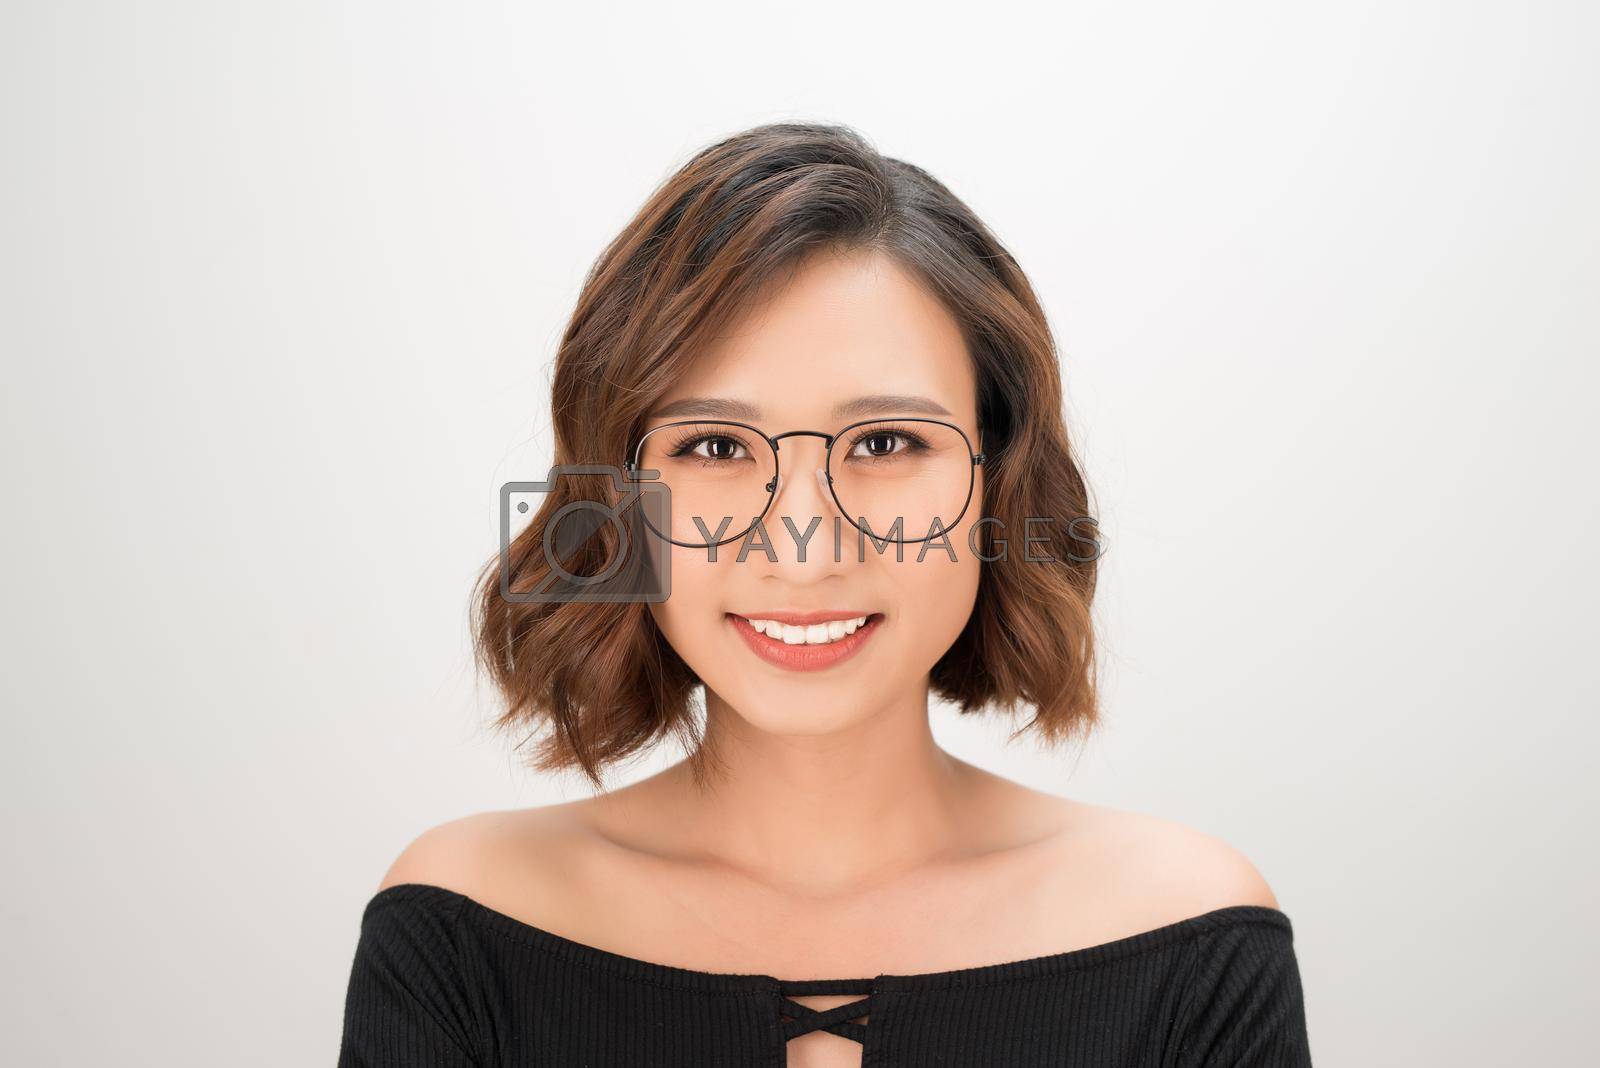 Royalty free image of Portrait of young Asian smiley woman wearing glasses over white background by makidotvn